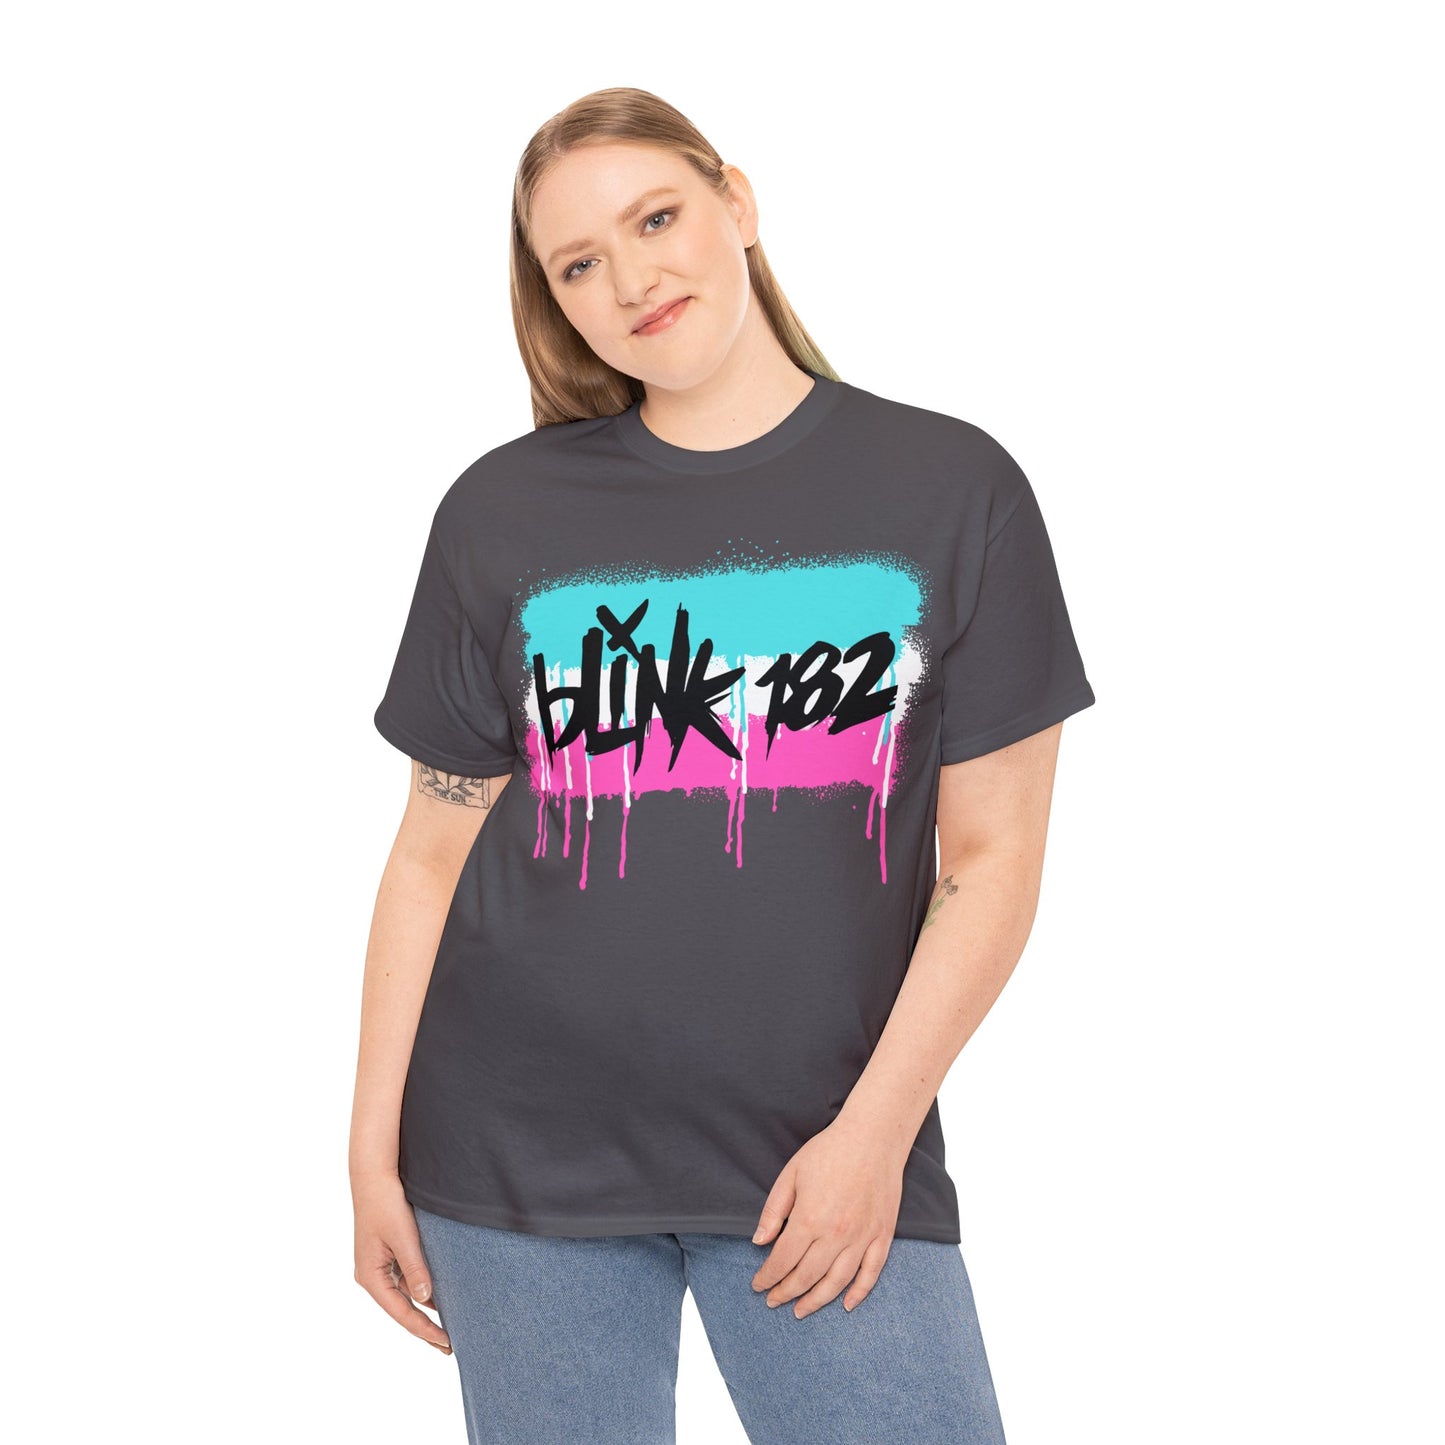 Blink 182 T-Shirt, Throwback to Old Blink Tee